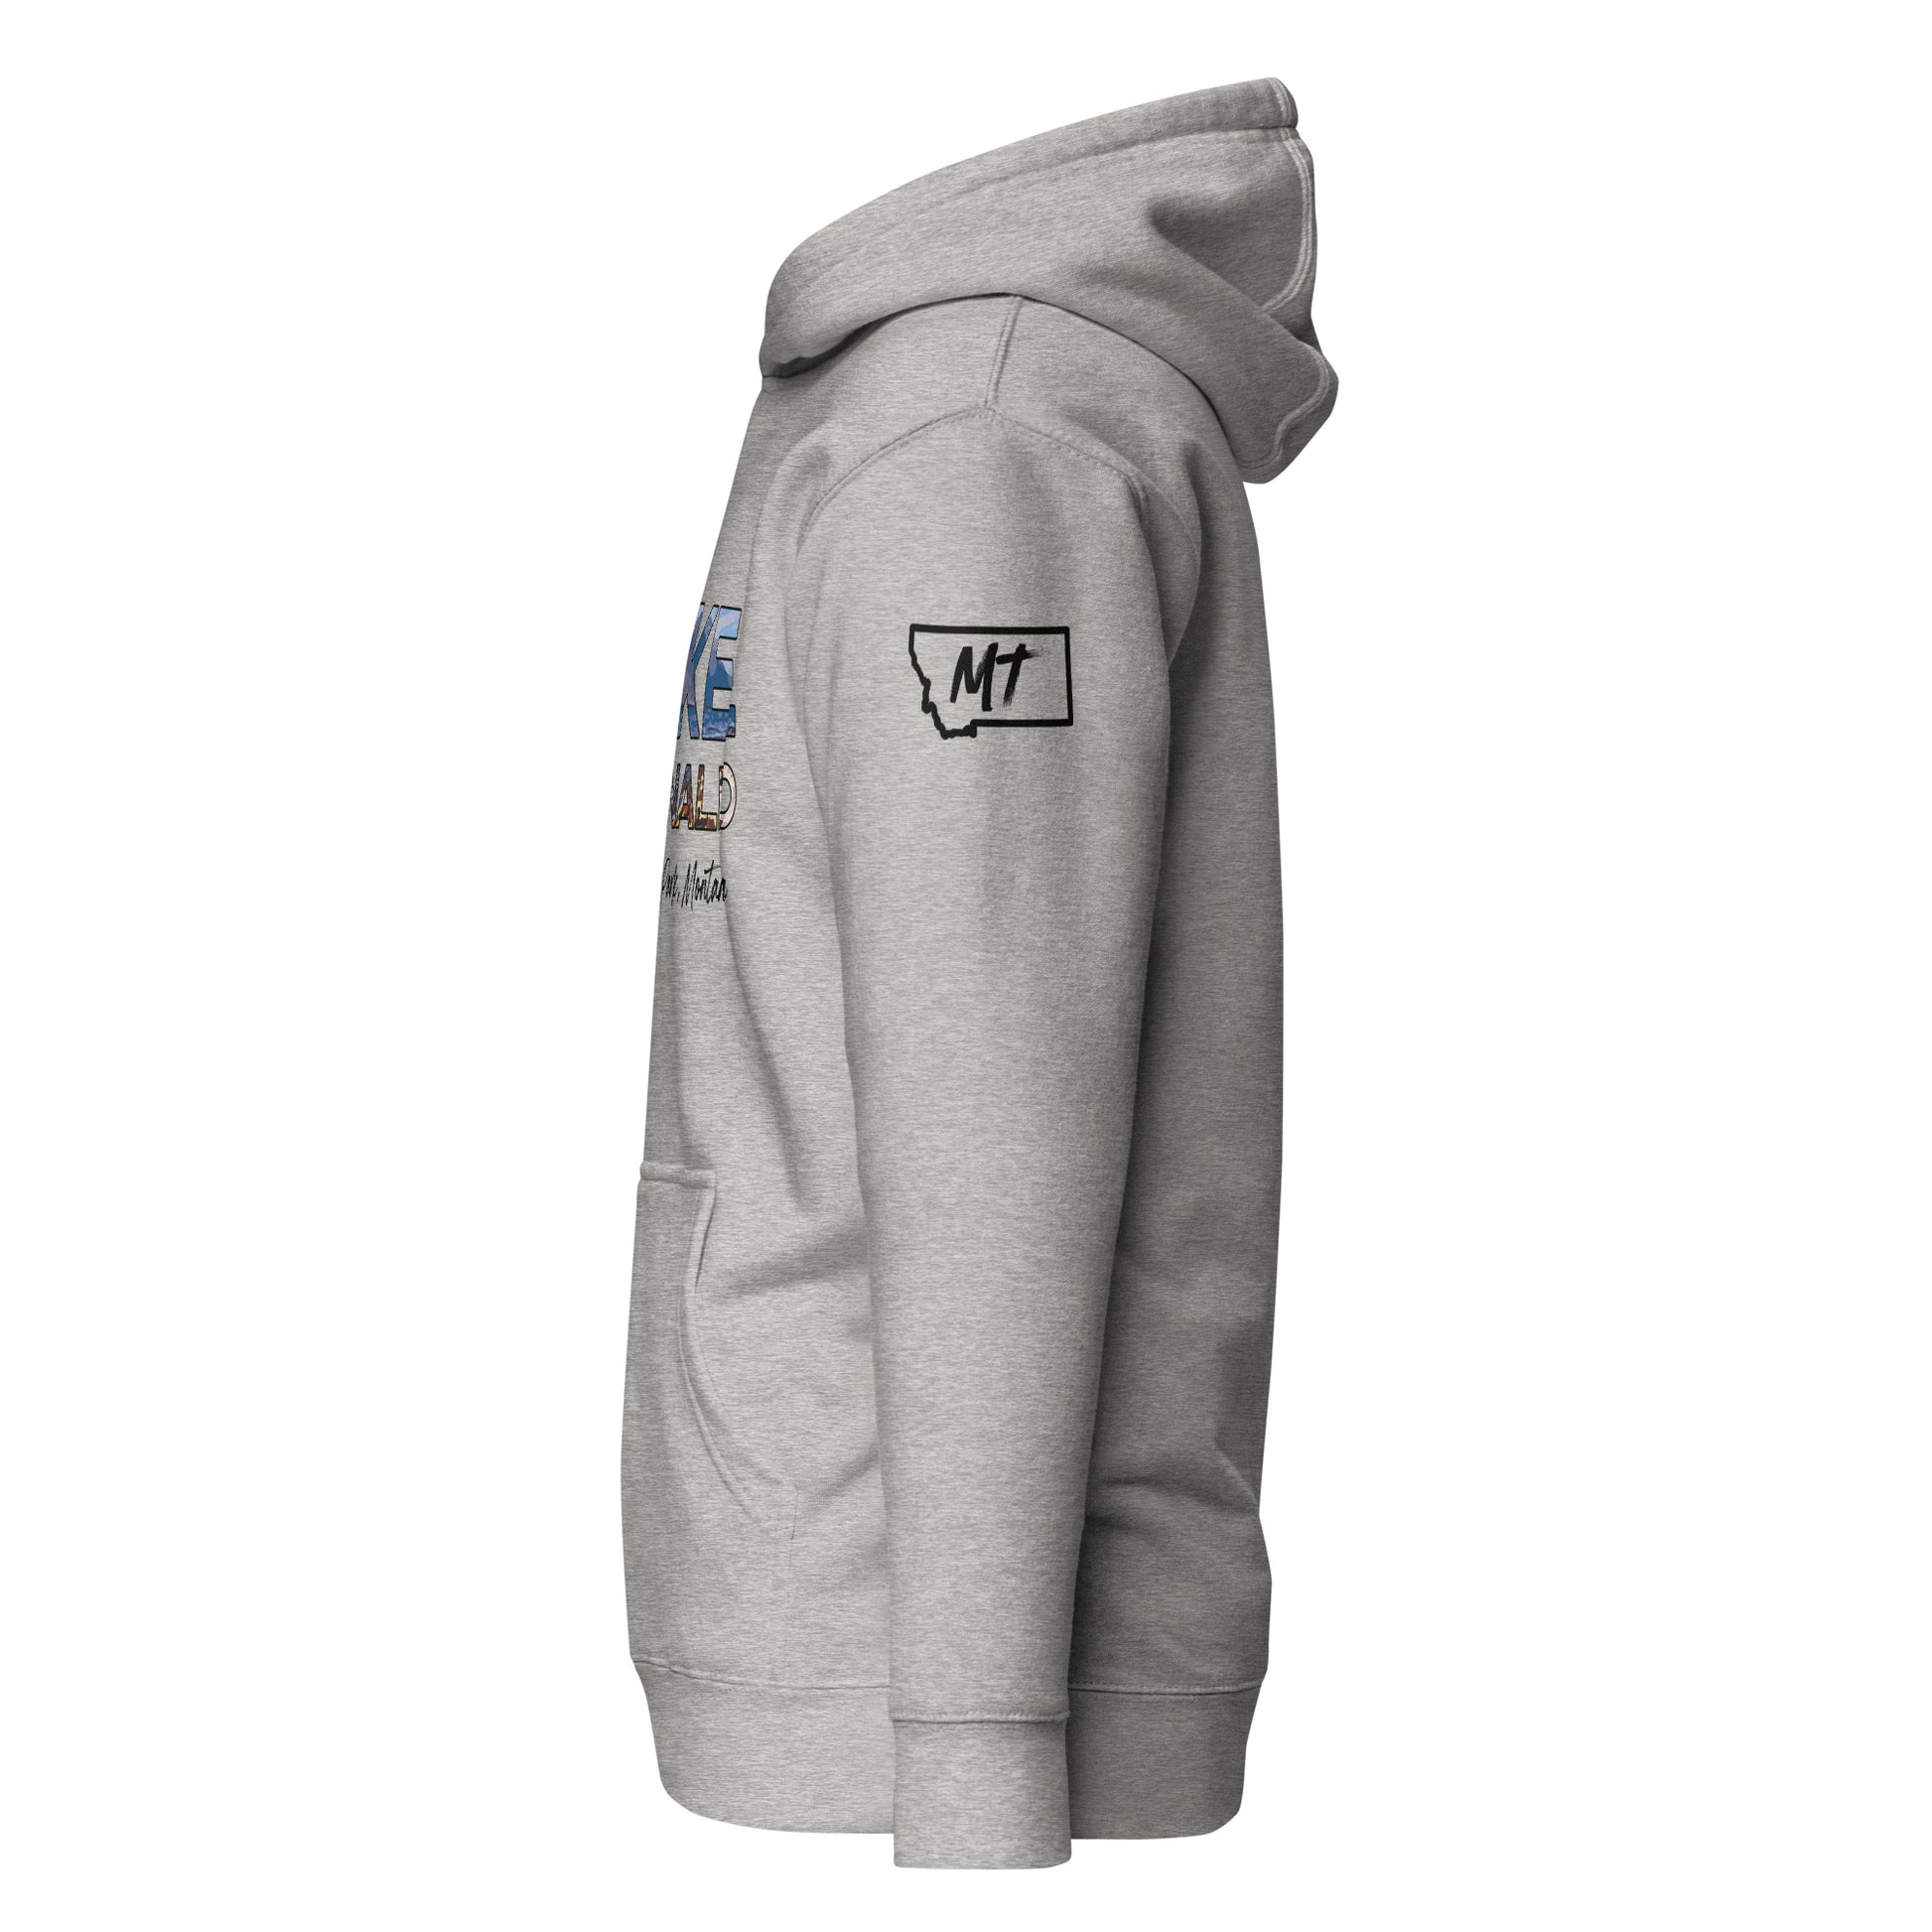 Left Side view of Lake McDonald in Glacier National Park Montana Carbon Grey Soft Hoodie from Park Attire